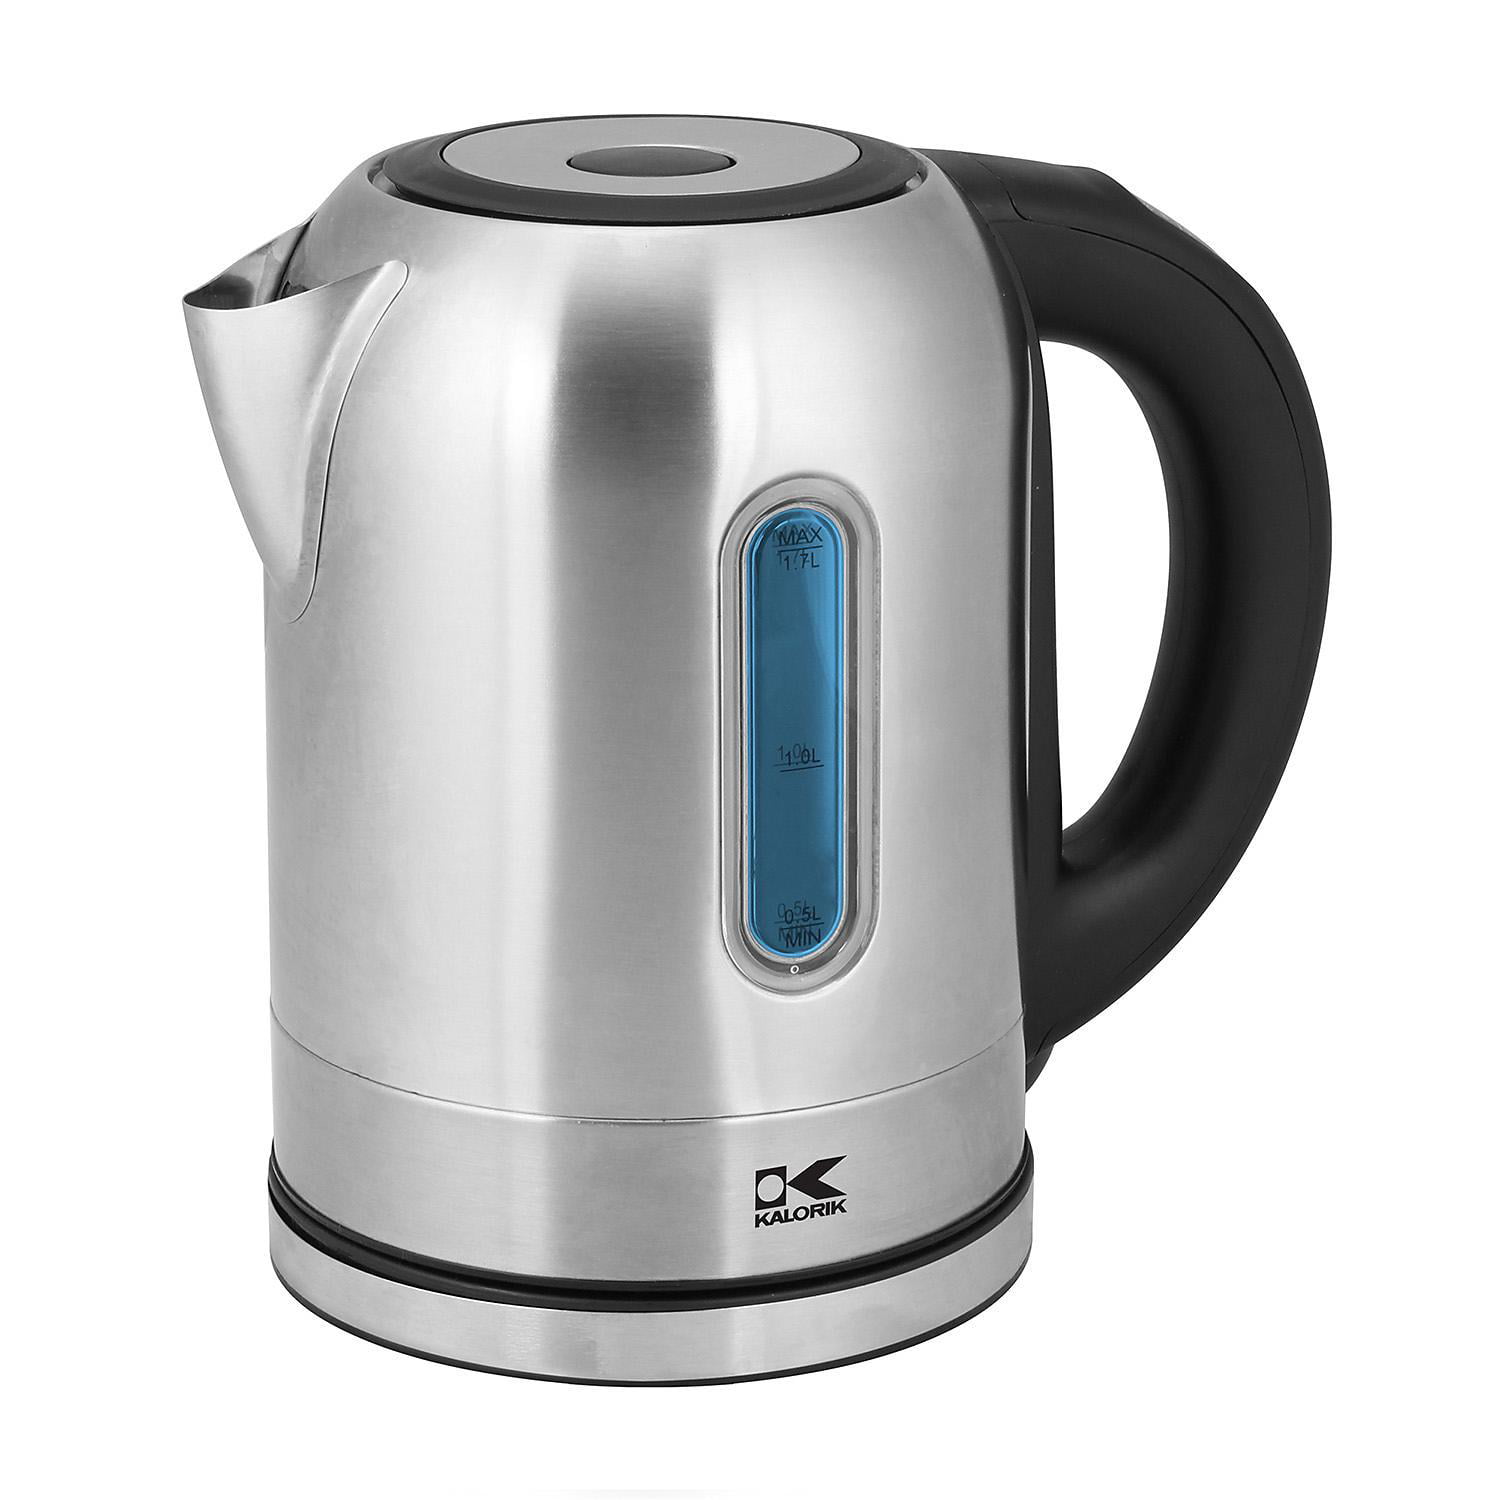 Black Stainless Dash DMGK300BS Illusion Mirrored Electric Kettle